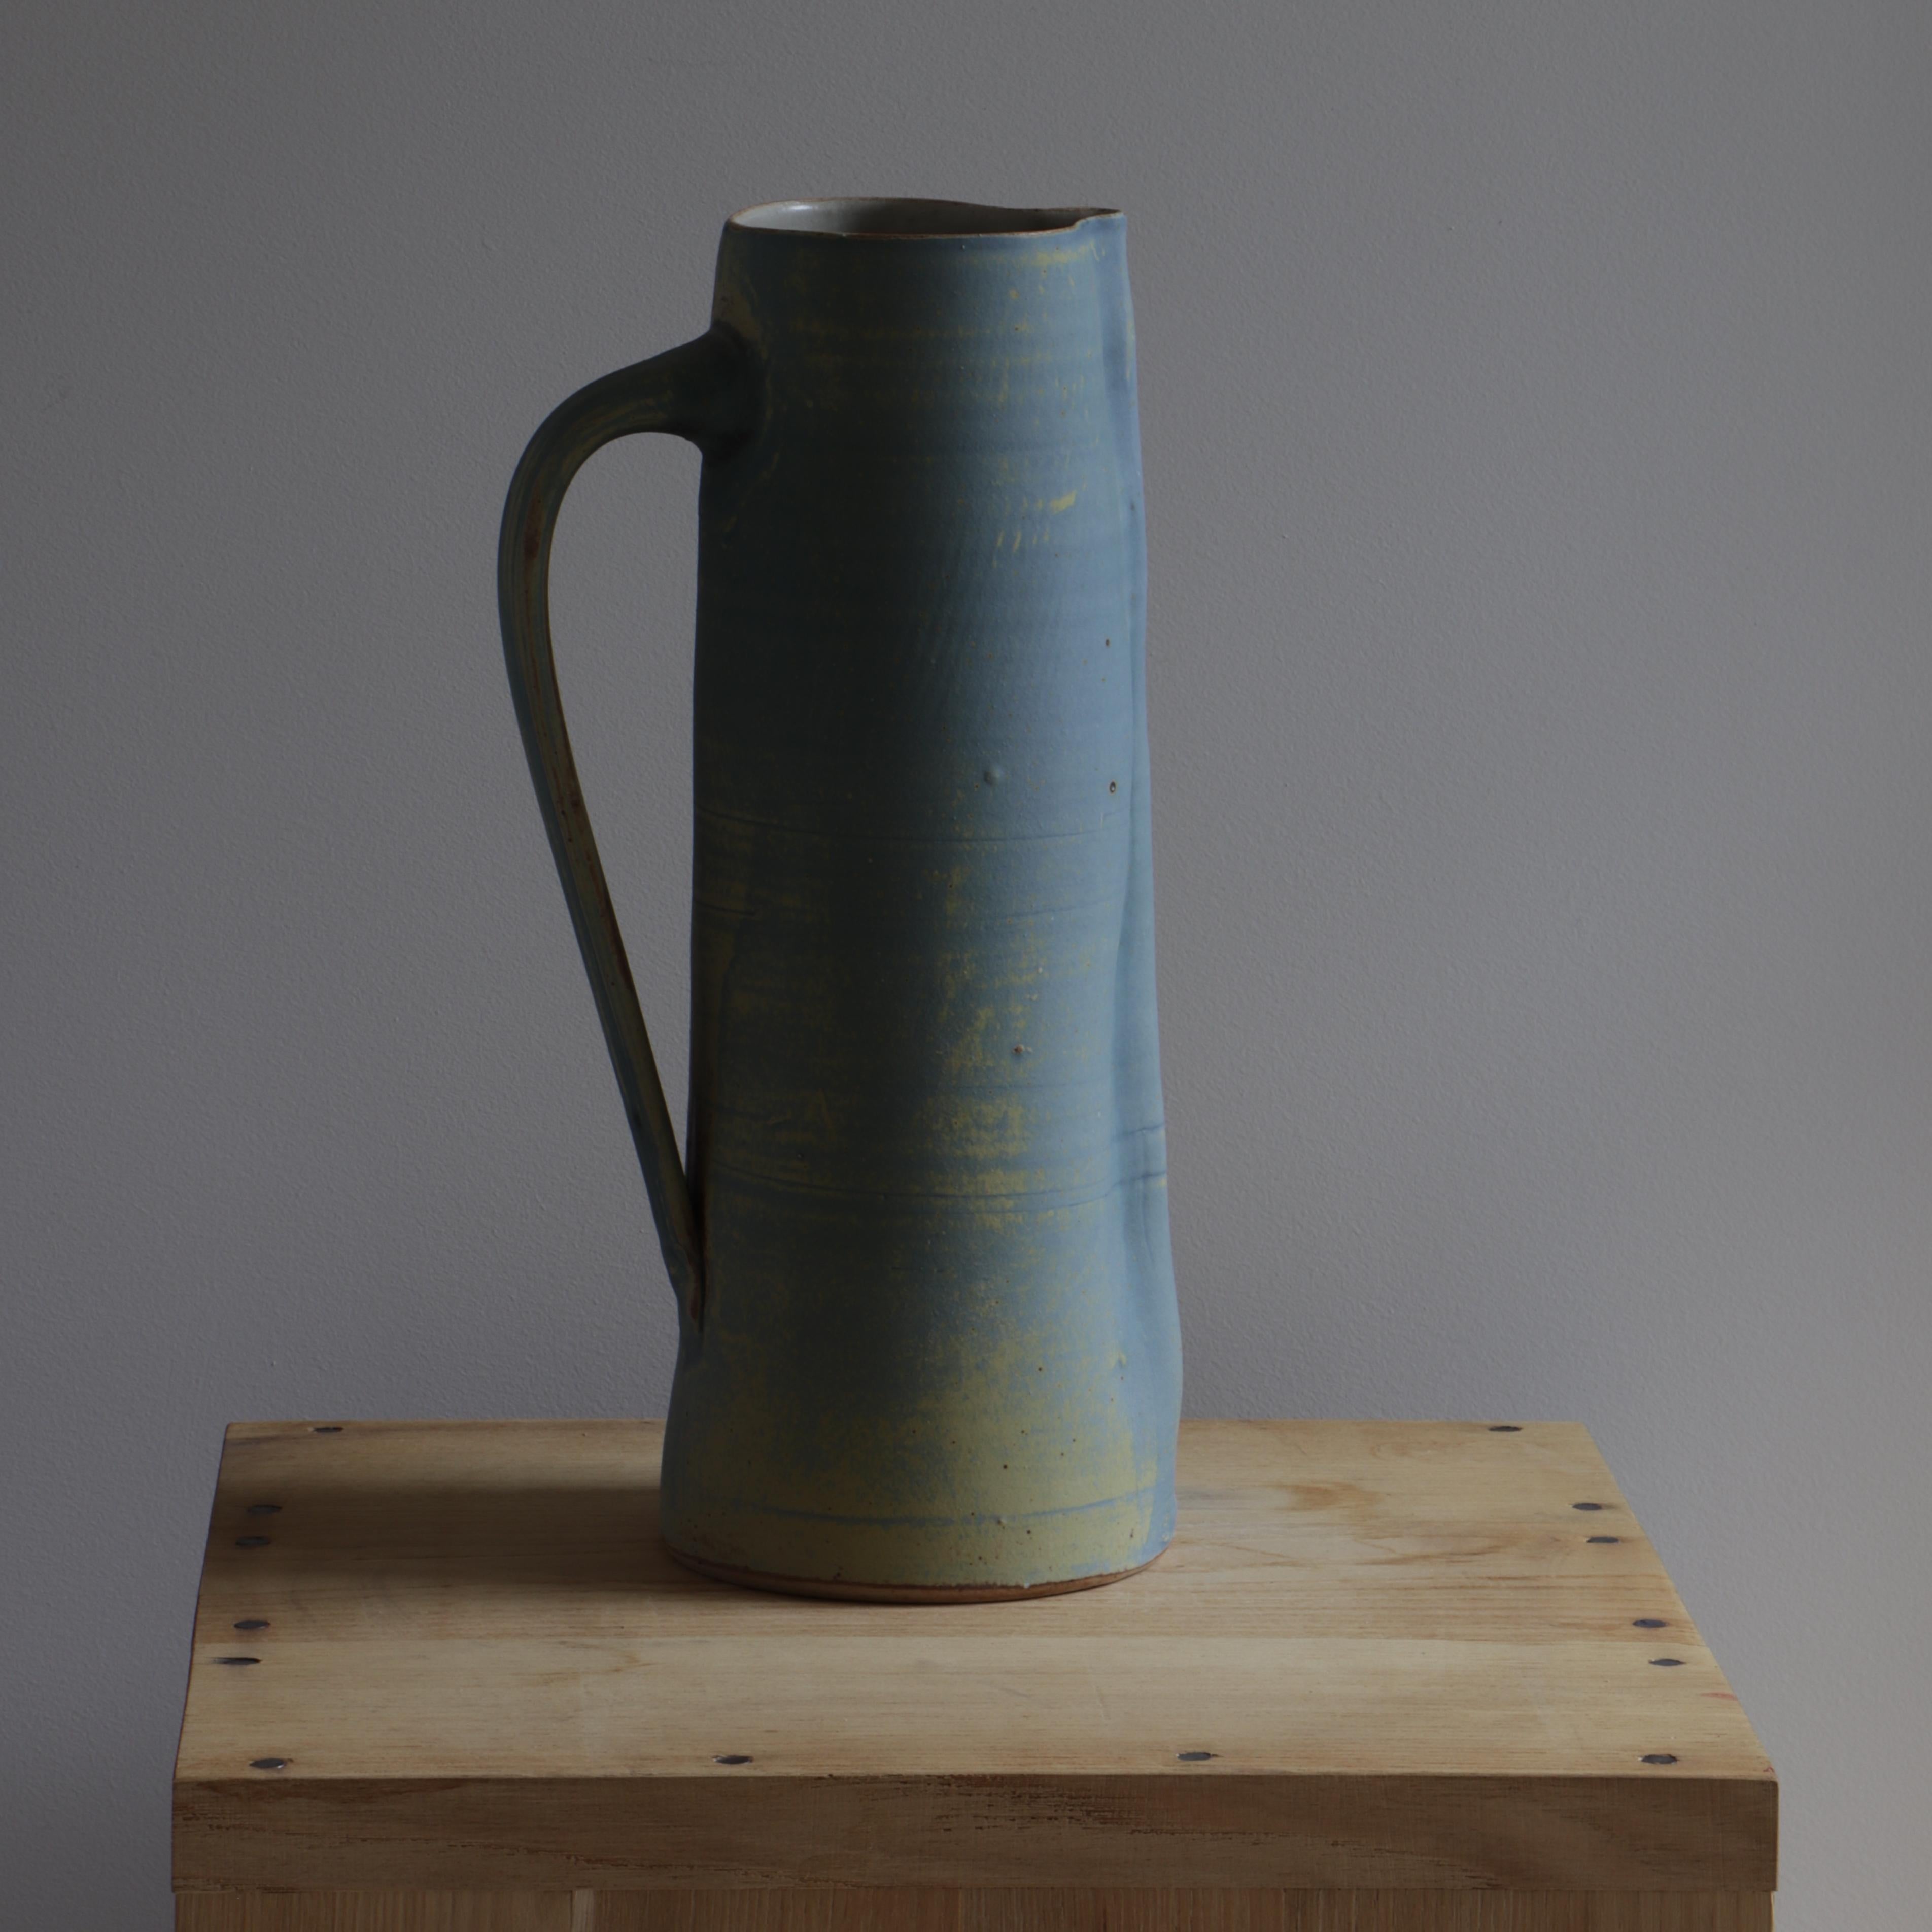 This ceramic jug was created by Ingrid Van Munster. Her works are made of porcelain sandstone. The colourisation phase consists in covering her pieces with enamel, after a first firing at 1000°C. She manufactures her own matt and satin enamels in a